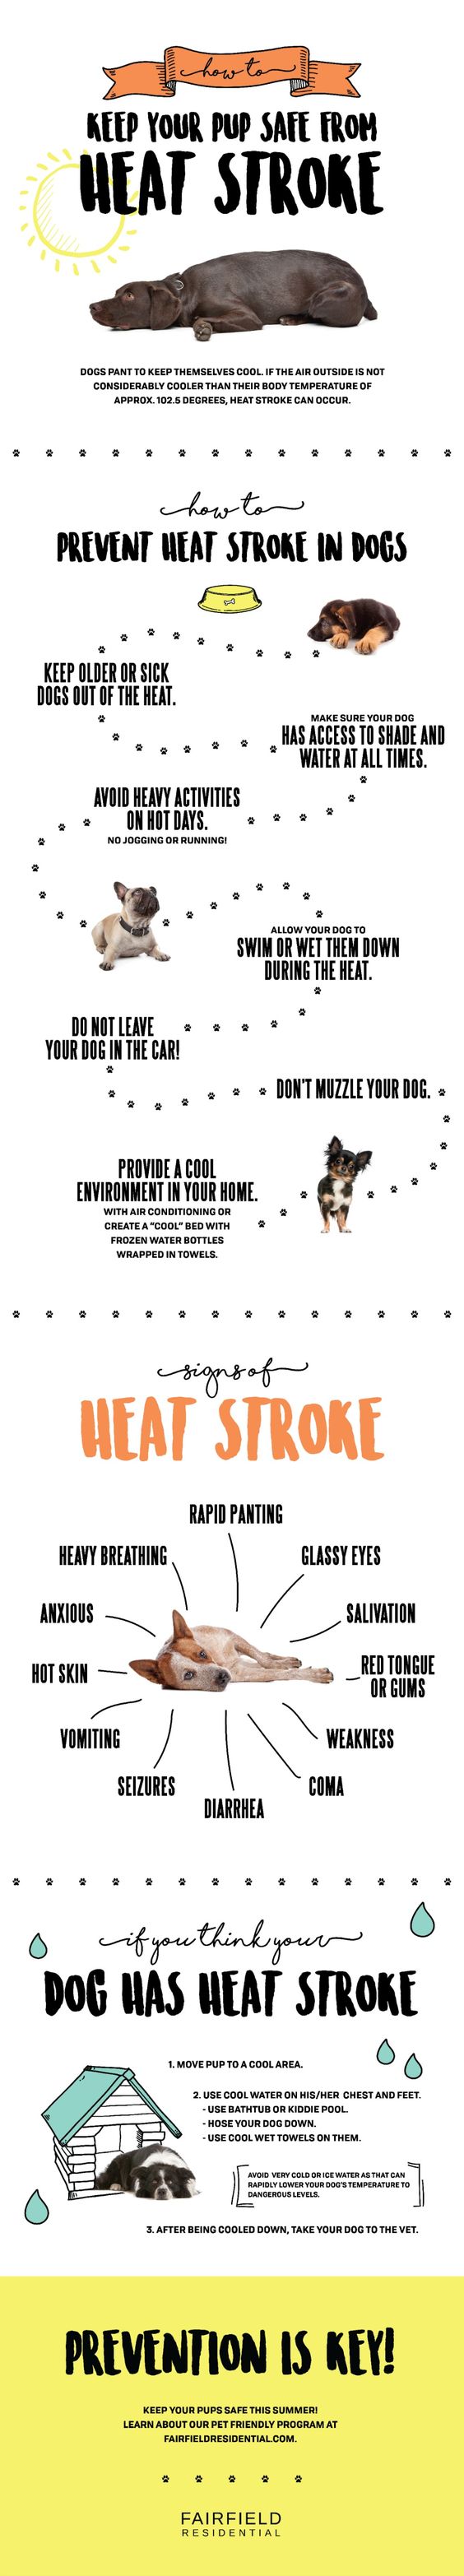 Take care of your pup in the summer heat. #heatstroke